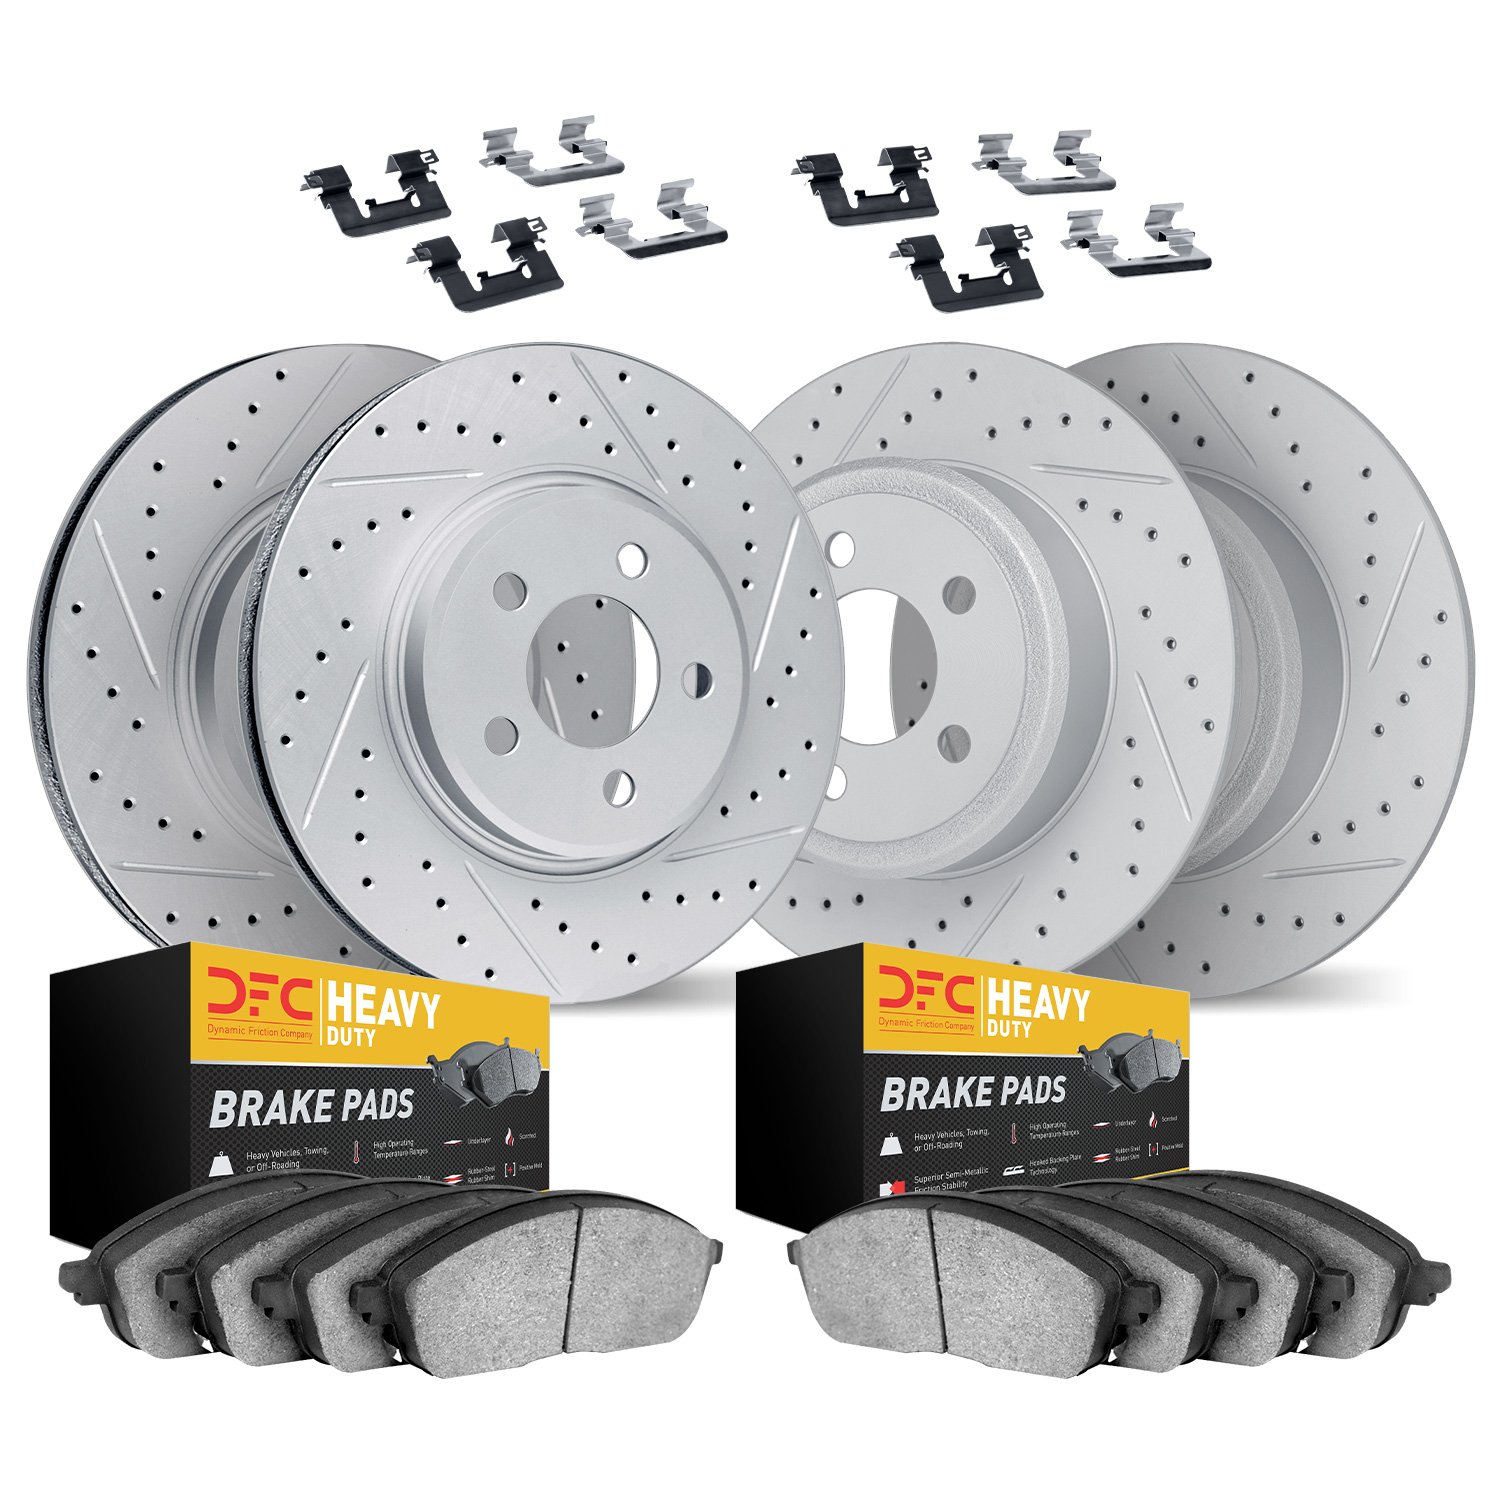 2214-99061 Geoperformance Drilled/Slotted Rotors w/Heavy-Duty Pads Kit & Hardware, 1997-2002 Ford/Lincoln/Mercury/Mazda, Positio